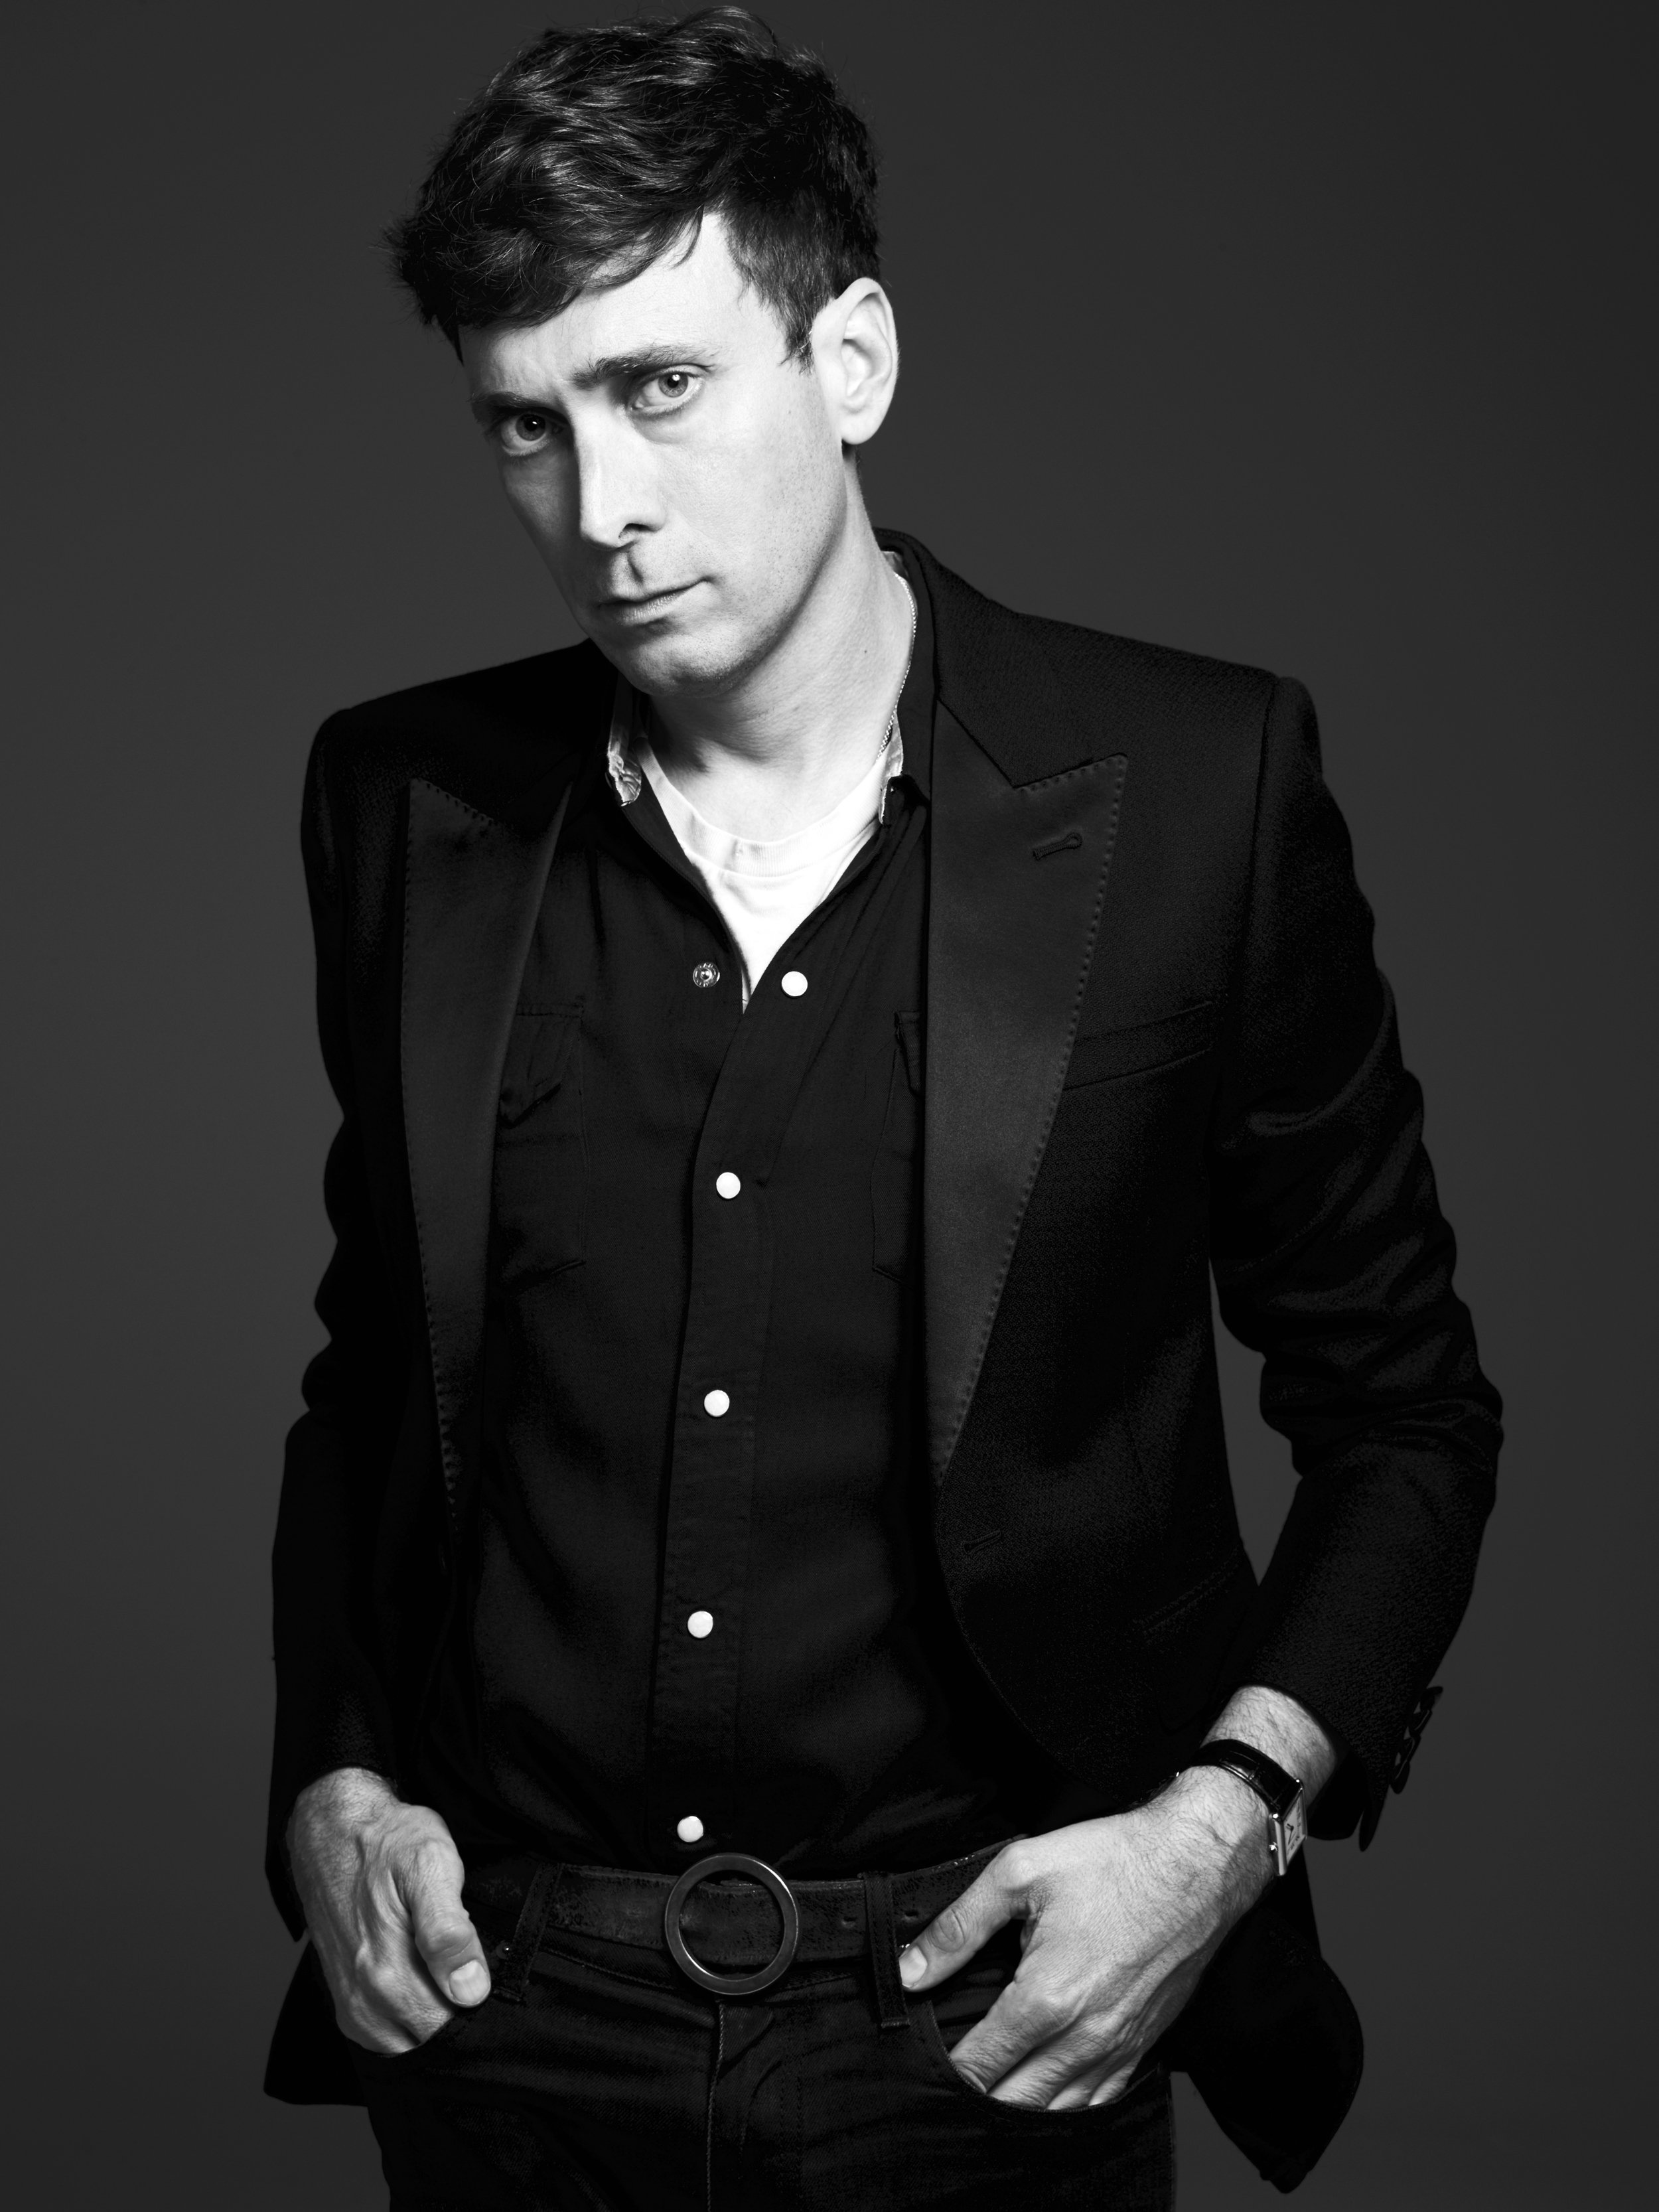 LVMH on X: LVMH is proud to announce Hedi Slimane's return to the Group,  as Artistic, Creative and Image Director of Céline.   #HediSlimane #Celine #LVMH  / X